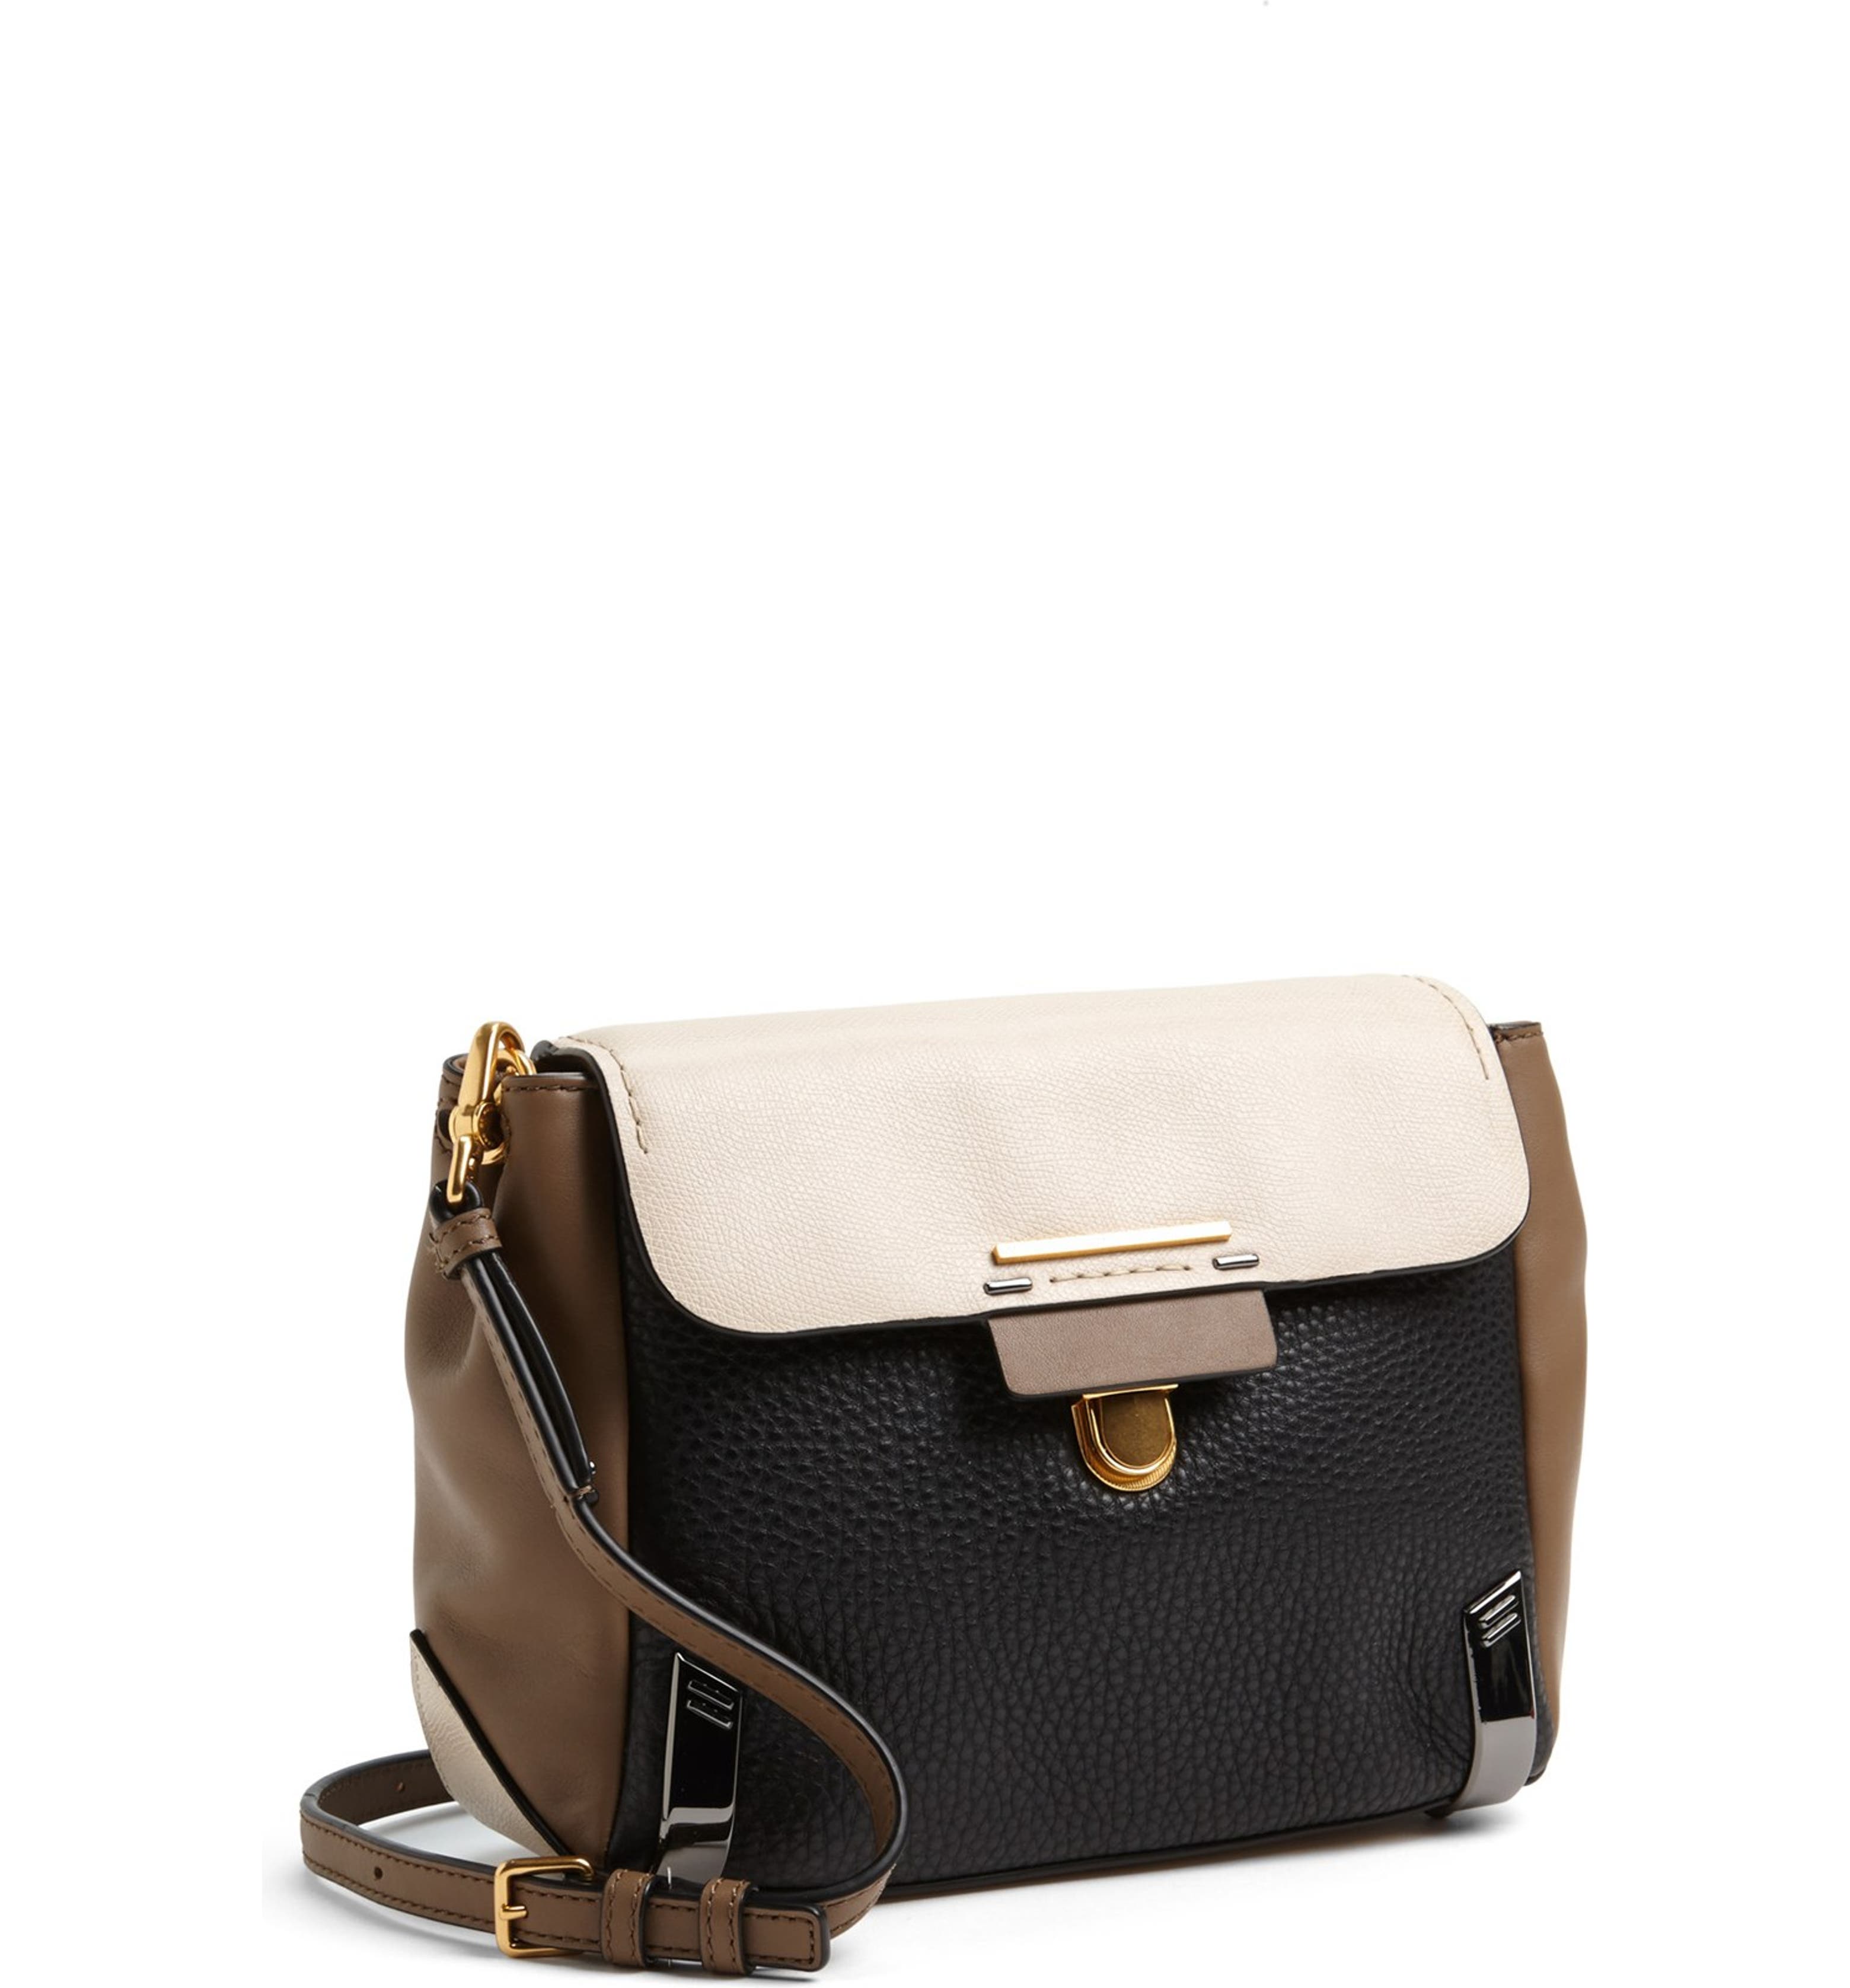 MARC BY MARC JACOBS 'Sheltered Island' Colorblock Crossbody Bag | Nordstrom